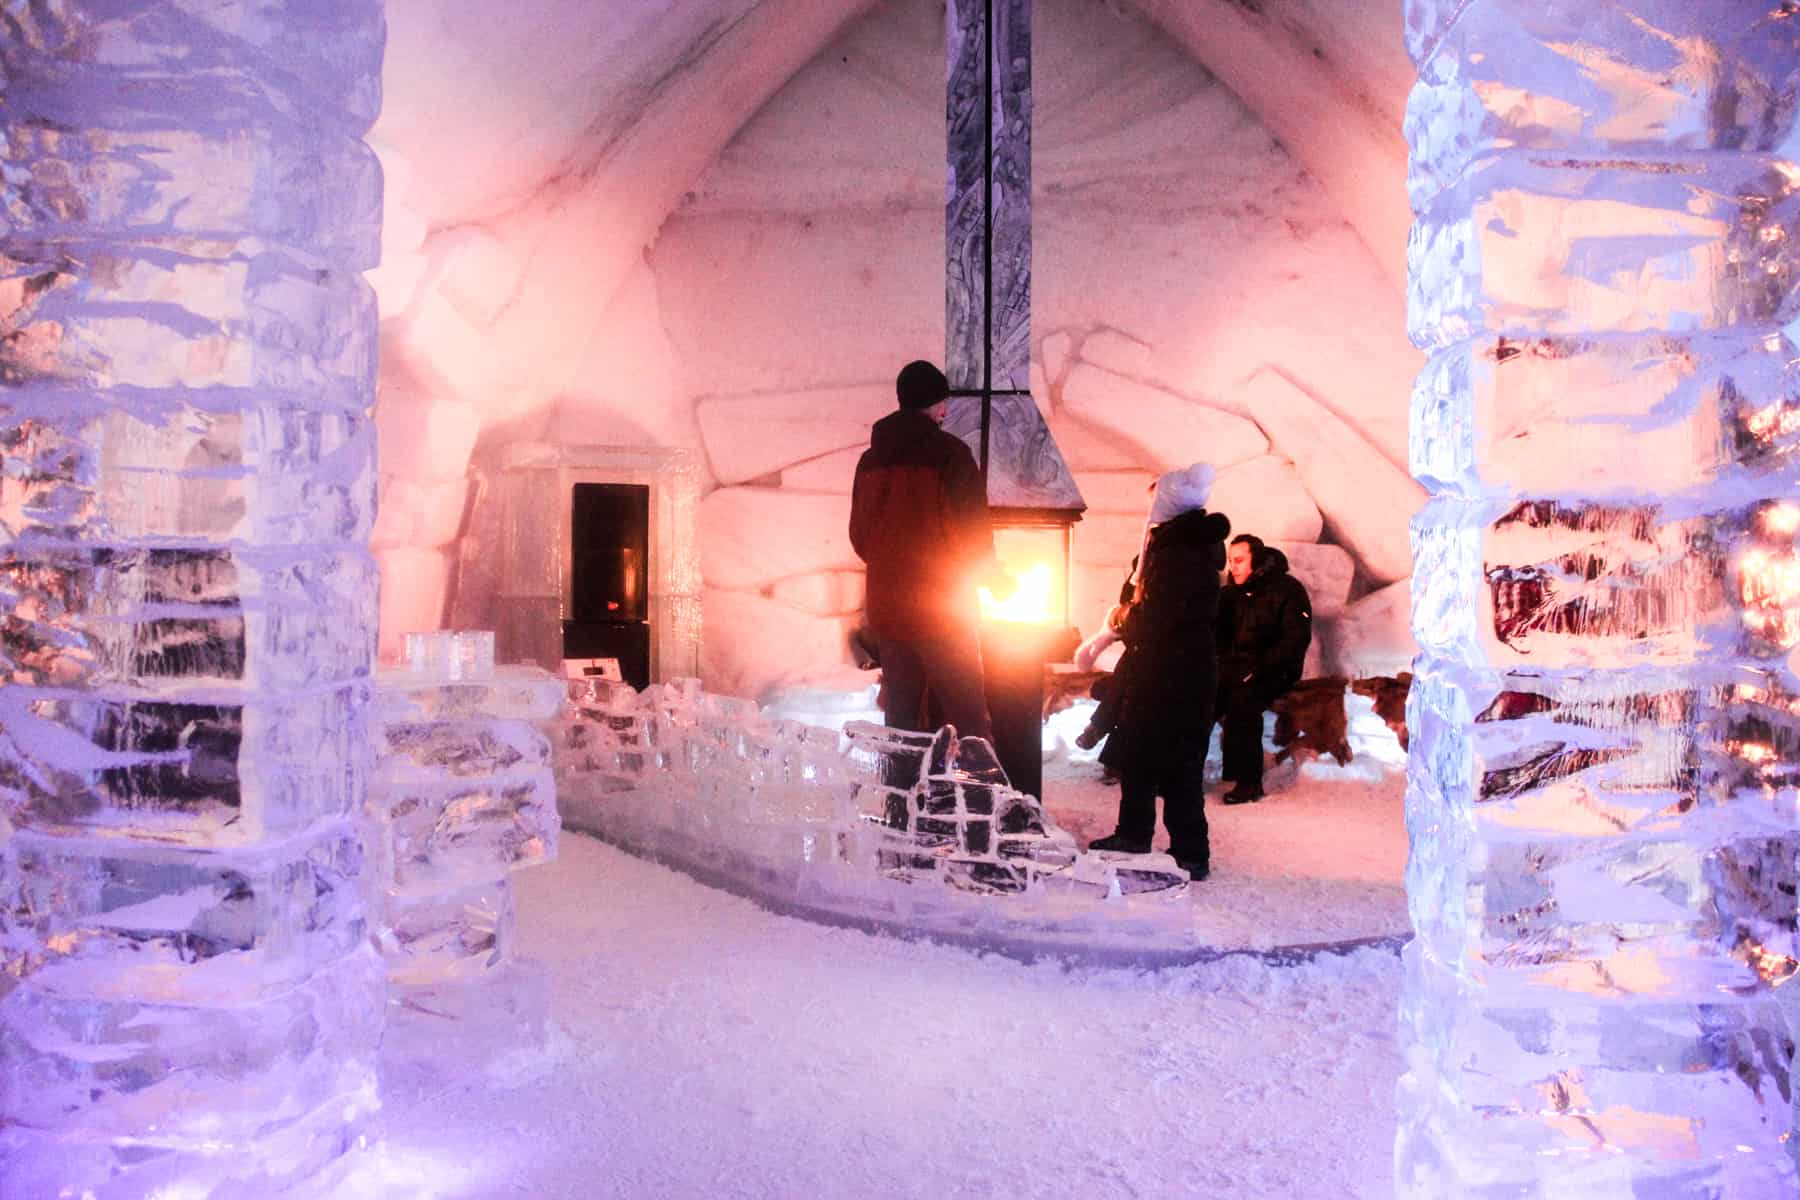 People gathering around a fire in a bar made entirely of ice in Quebec's ice hotel, Hôtel de Glace.